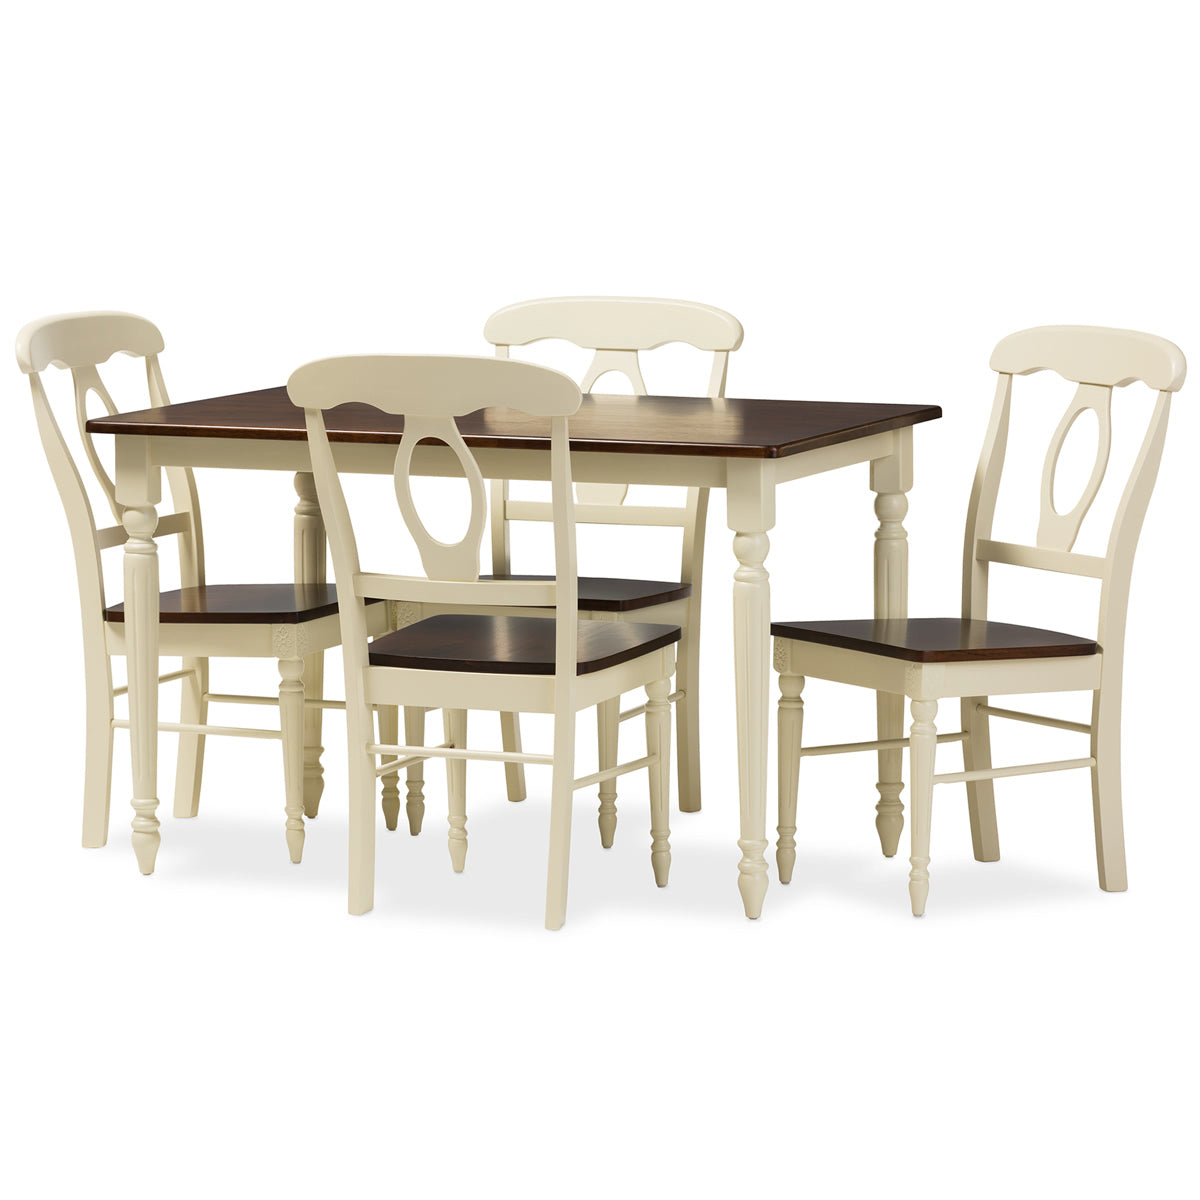 Baxton Studio Napoleon French Country Cottage Buttermilk and "Cherry" Brown Finishing Wood 5-Piece Dining Set Baxton Studio--Minimal And Modern - 2